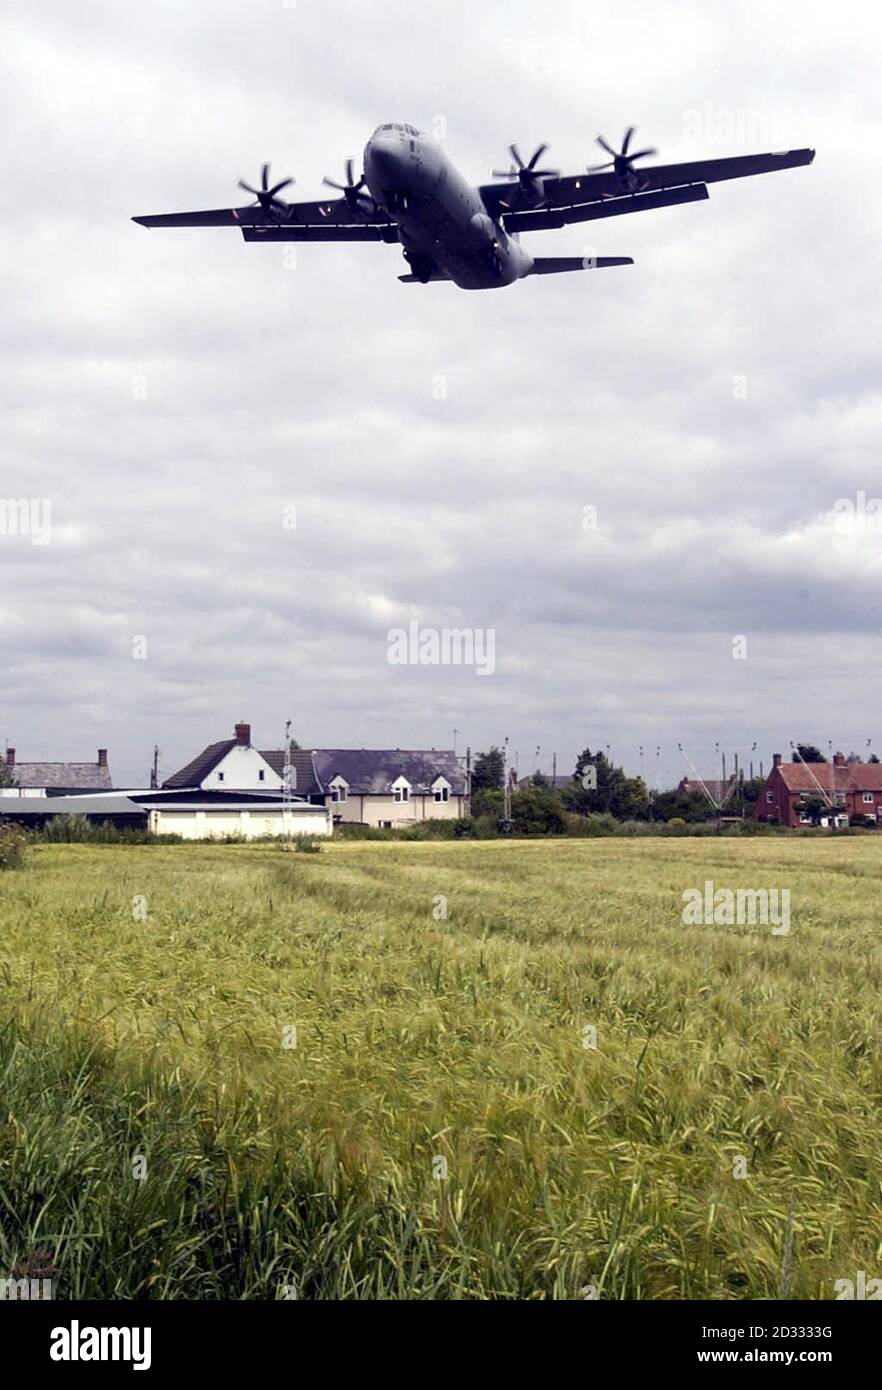 A Hercules flies over local houses, as it lands at RAF Lyneham, in Wiltshire. News of the closure of RAF Lyneham provoked fury from a Tory MP who accused the Prime Minister of lying in Parliament about the future of the base. *  James Gray, Conservative MP for north Wiltshire, said the closure of Lyneham would have a devastating impact on the local community and could threaten the livelihoods of up to 10,000 people in the area. 'It is a disgraceful announcement, disgracefully handled and it is a huge disappointment for the people of Lyneham,' said Mr Gray. Stock Photo